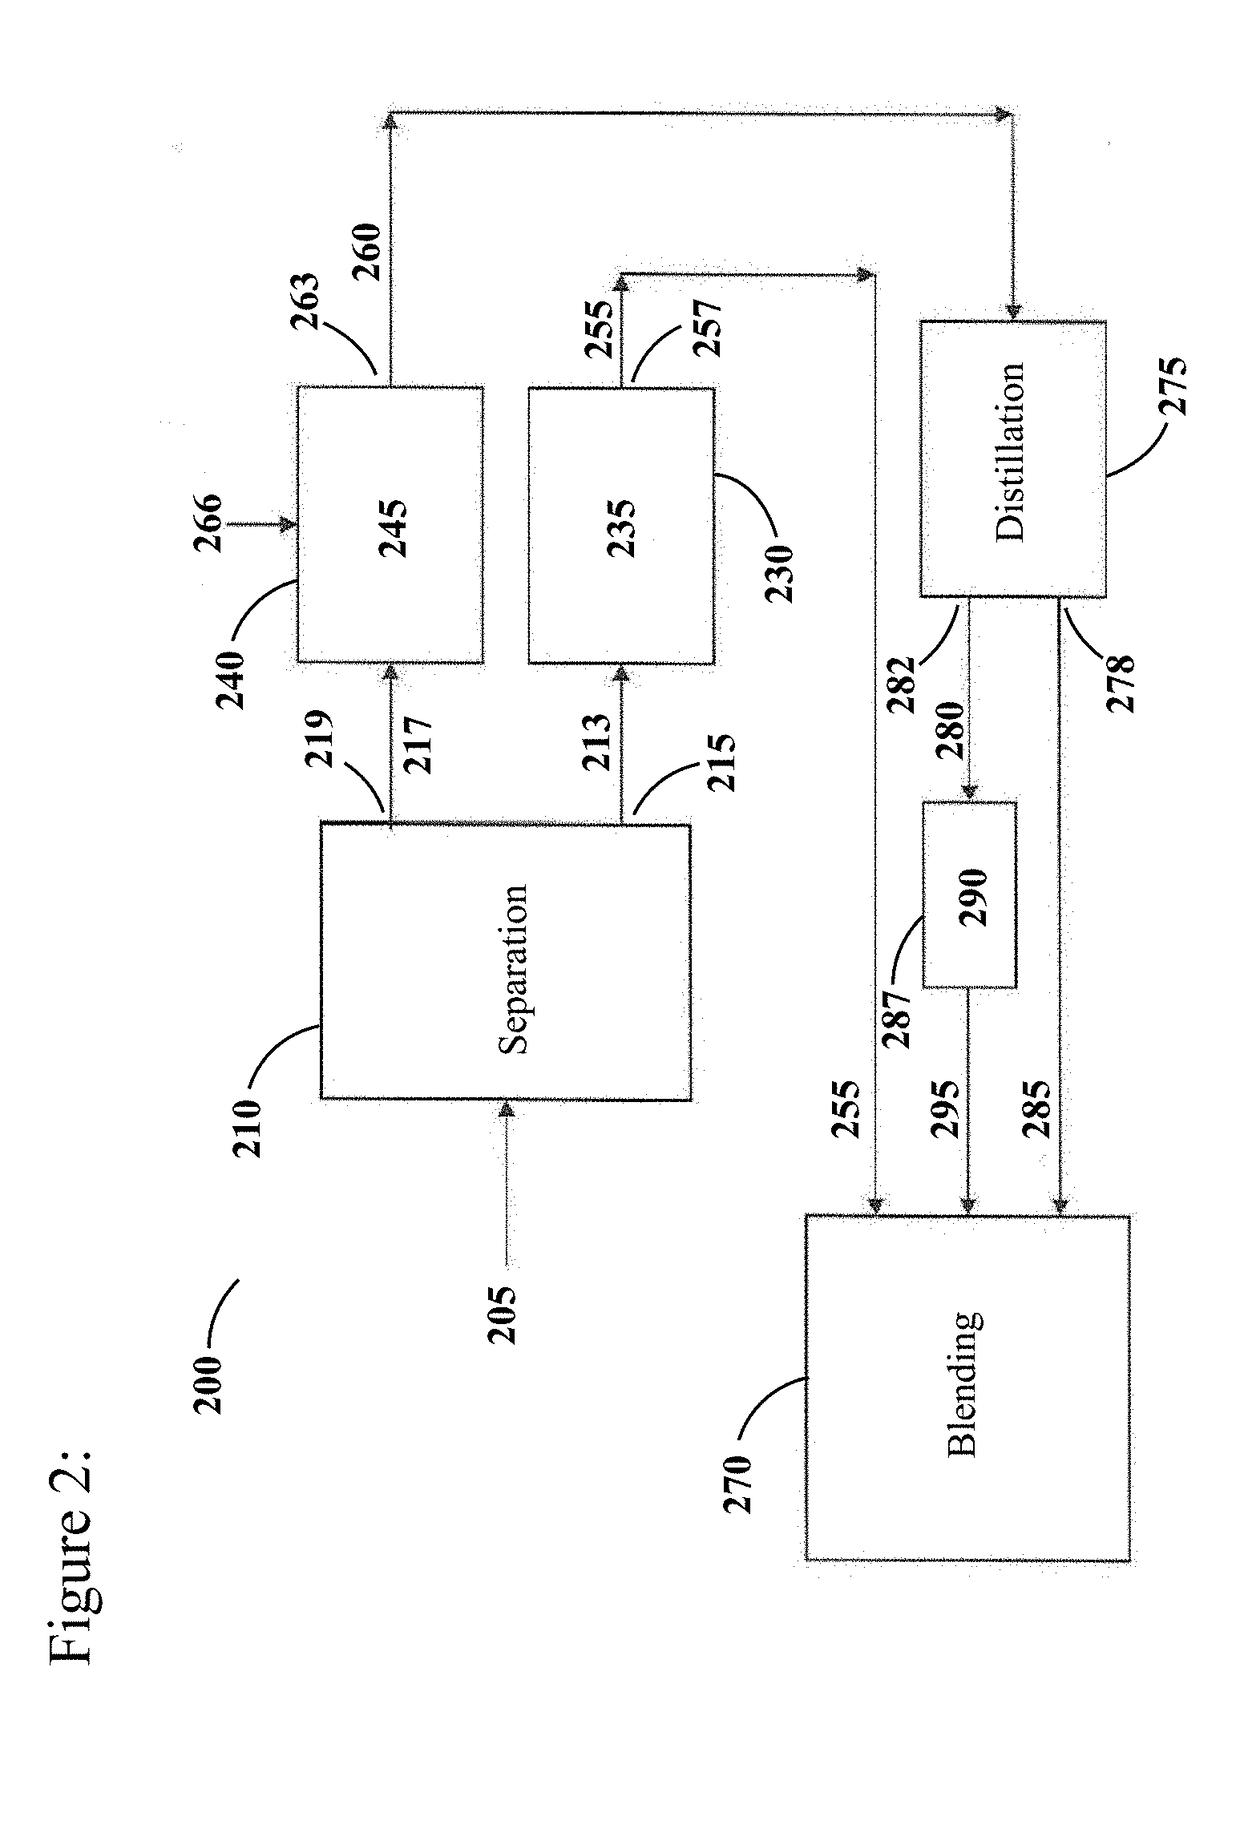 Processes for selective naphtha reforming